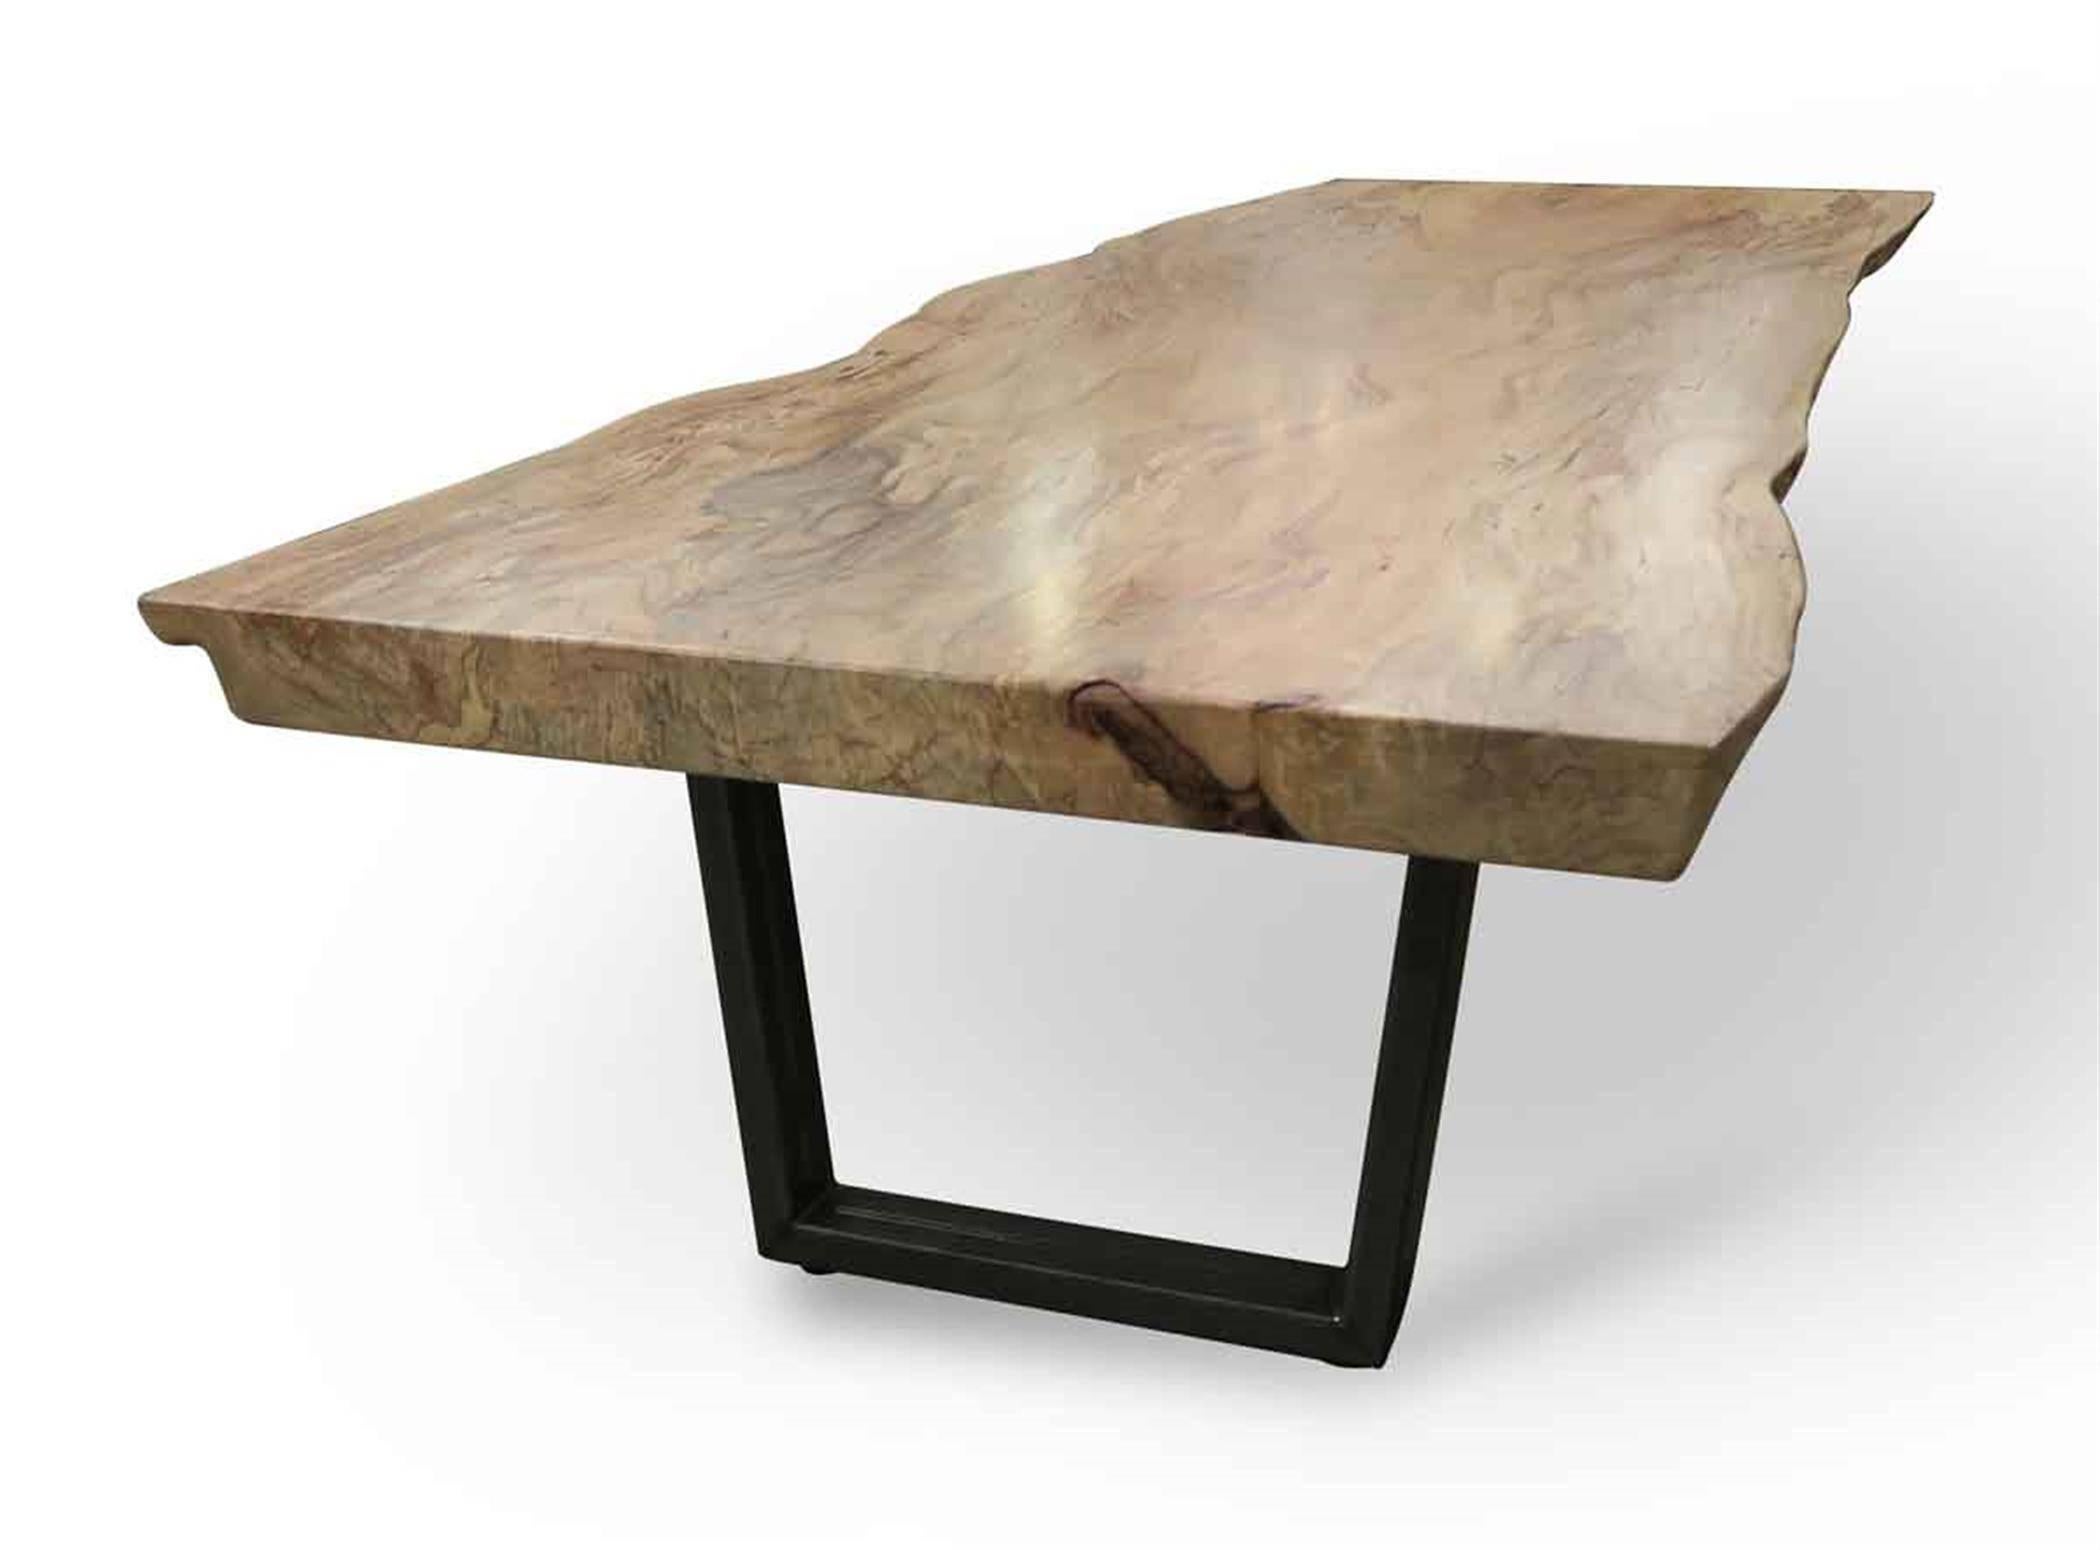 Single slab spalted maple live edge coffee Mid-Century Modern Style tabletop with U framed black steel frames. This is a one of kind piece! This can be seen at our 5 East 16th St location on Union Square in Manhattan.